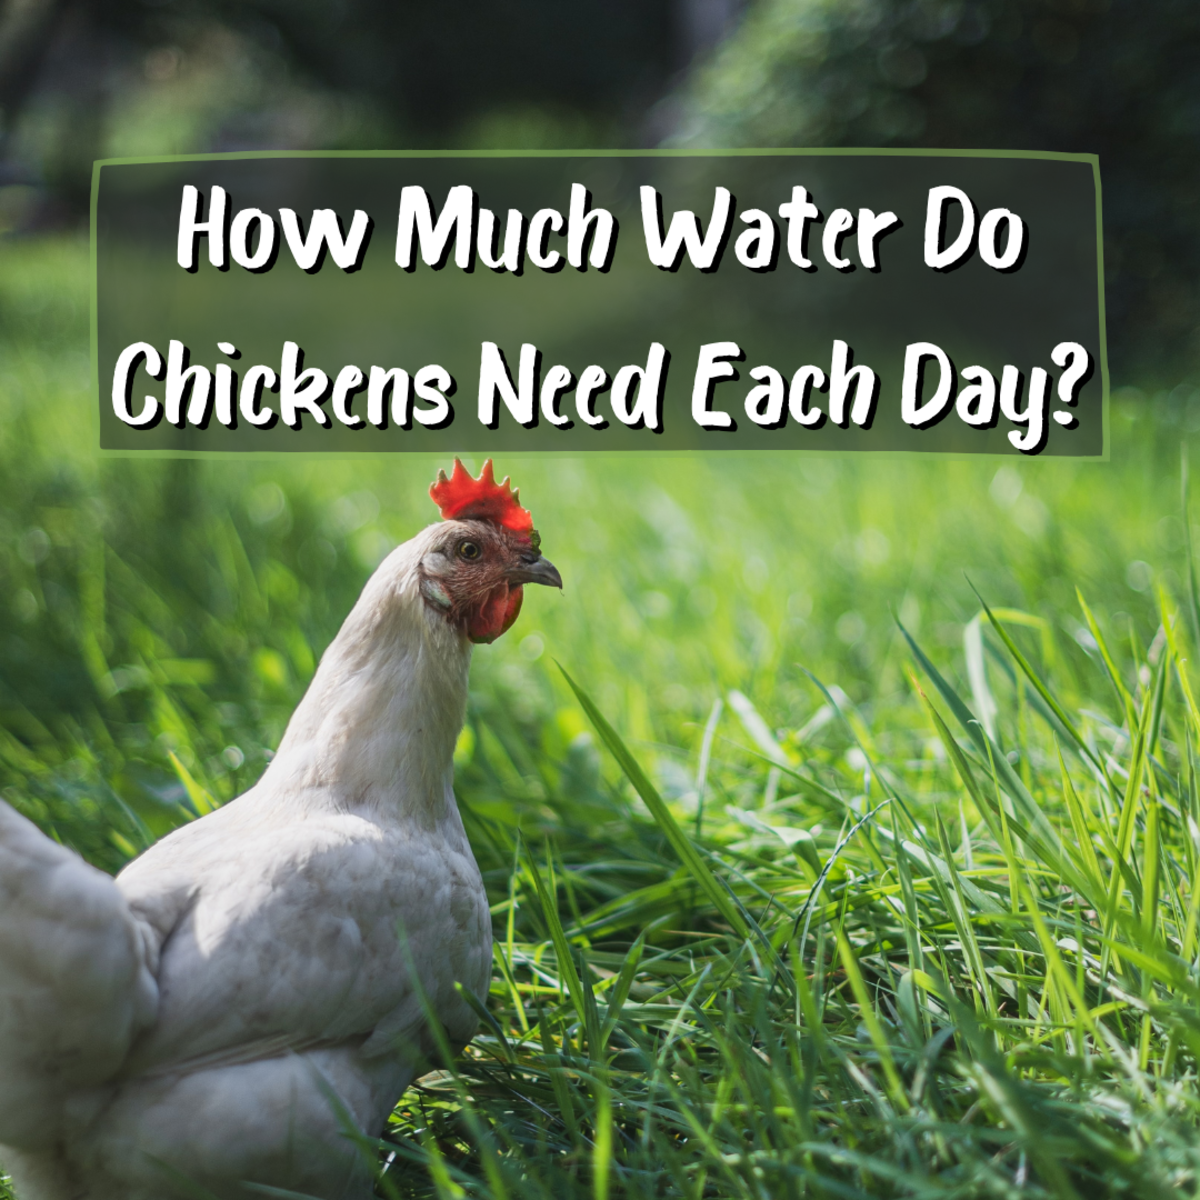 Read on for more info on how much water to give your chickens each day, as well as how to combat heat stress and dehydration.